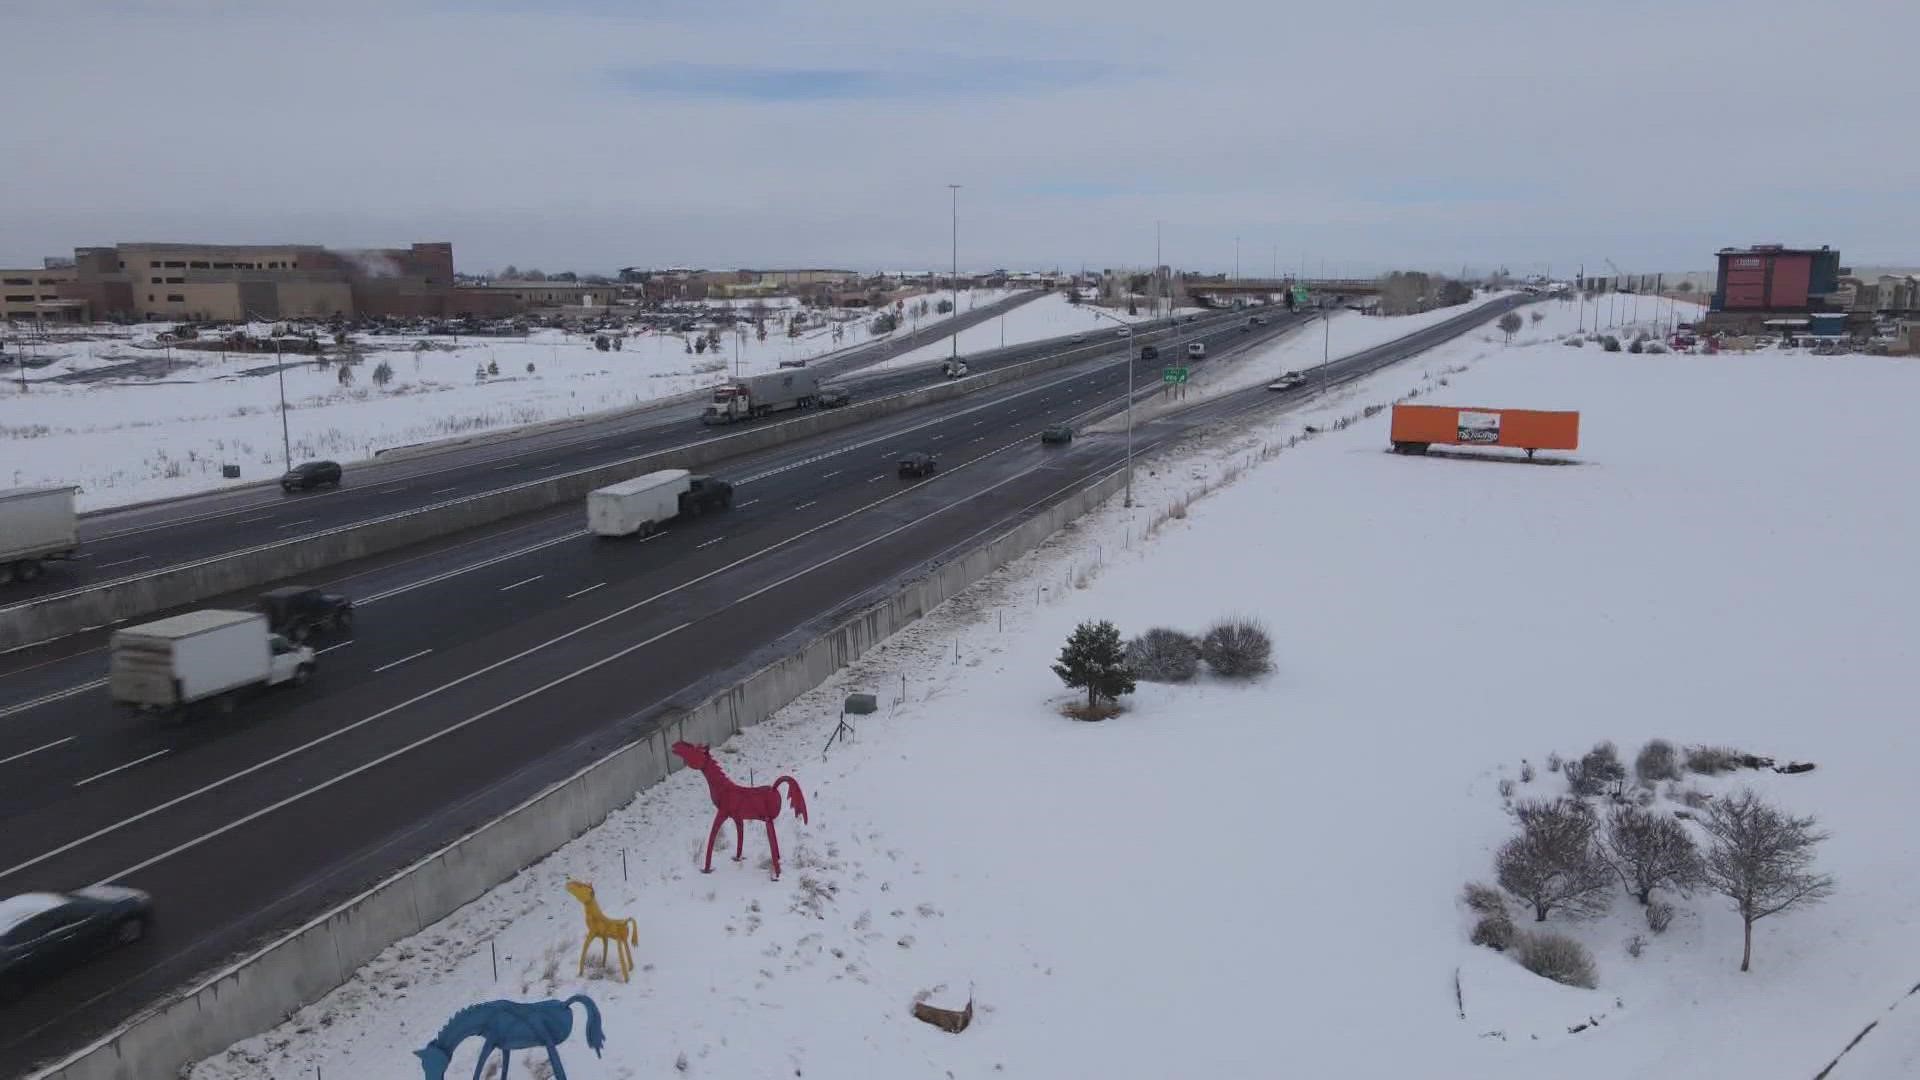 A woman was hit by two vehicles and killed on I-25 near Thornton on New Year's Day after getting out of a ride-share car and walking into the roadway, police said.